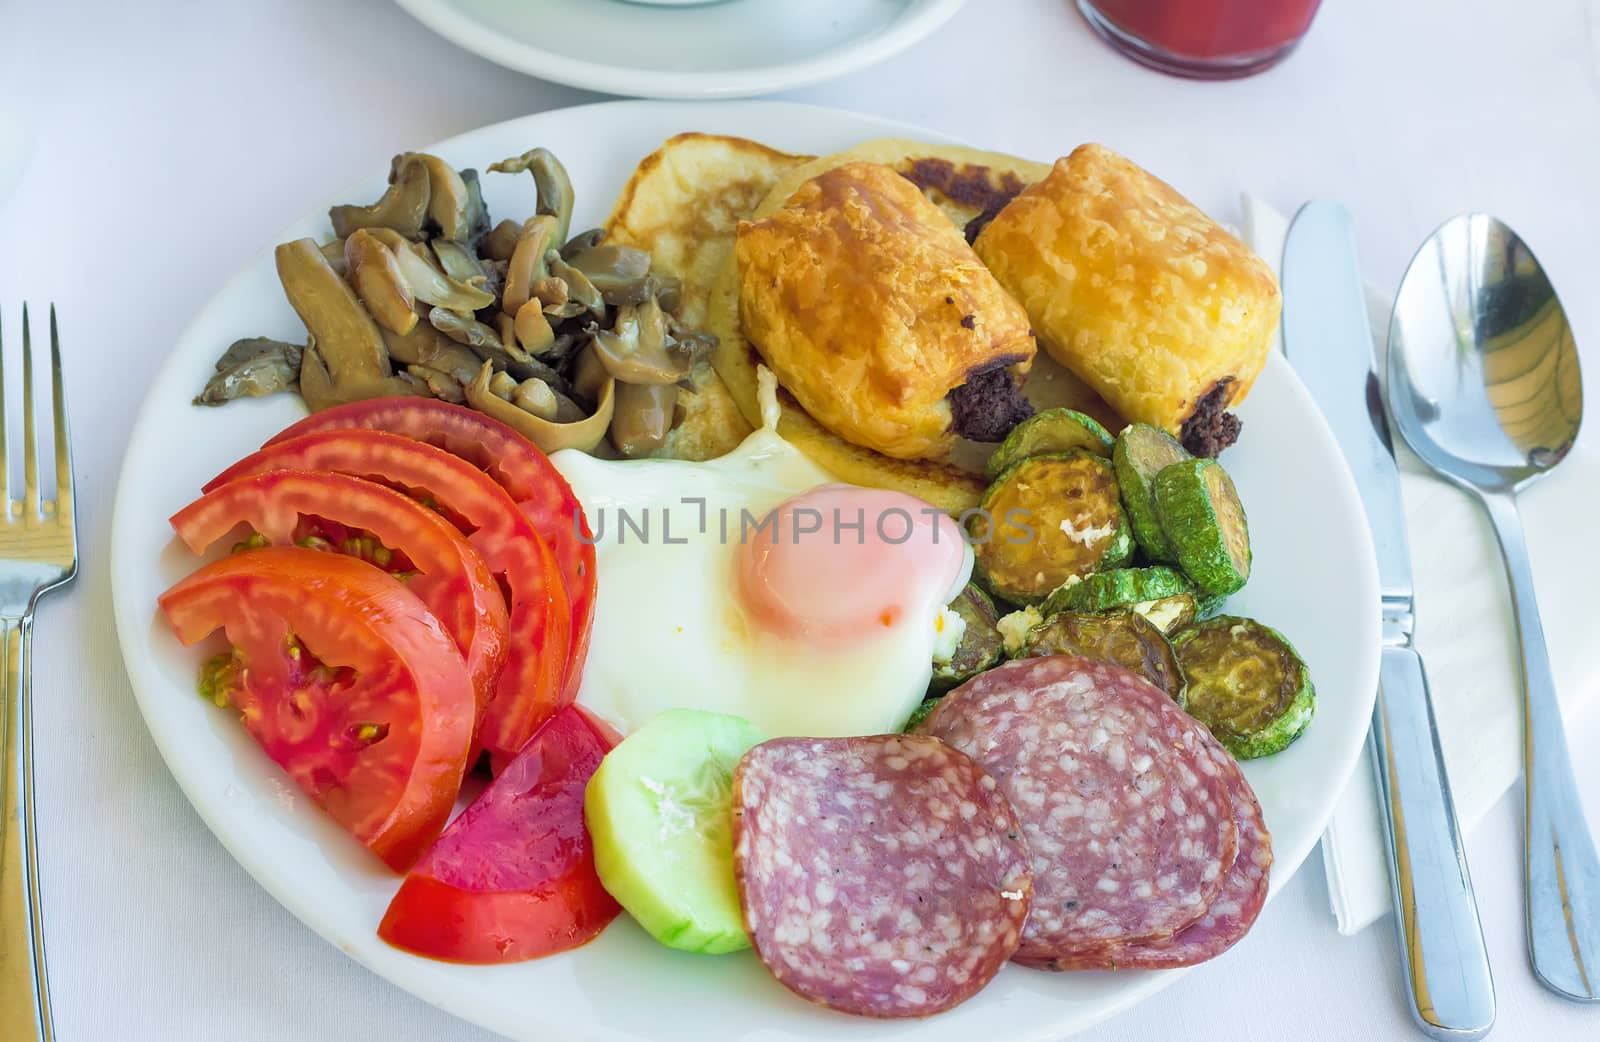 Sliced delicious slices of sausage and scrambled eggs with tomatoes and grilled zucchini on the plate on the table.